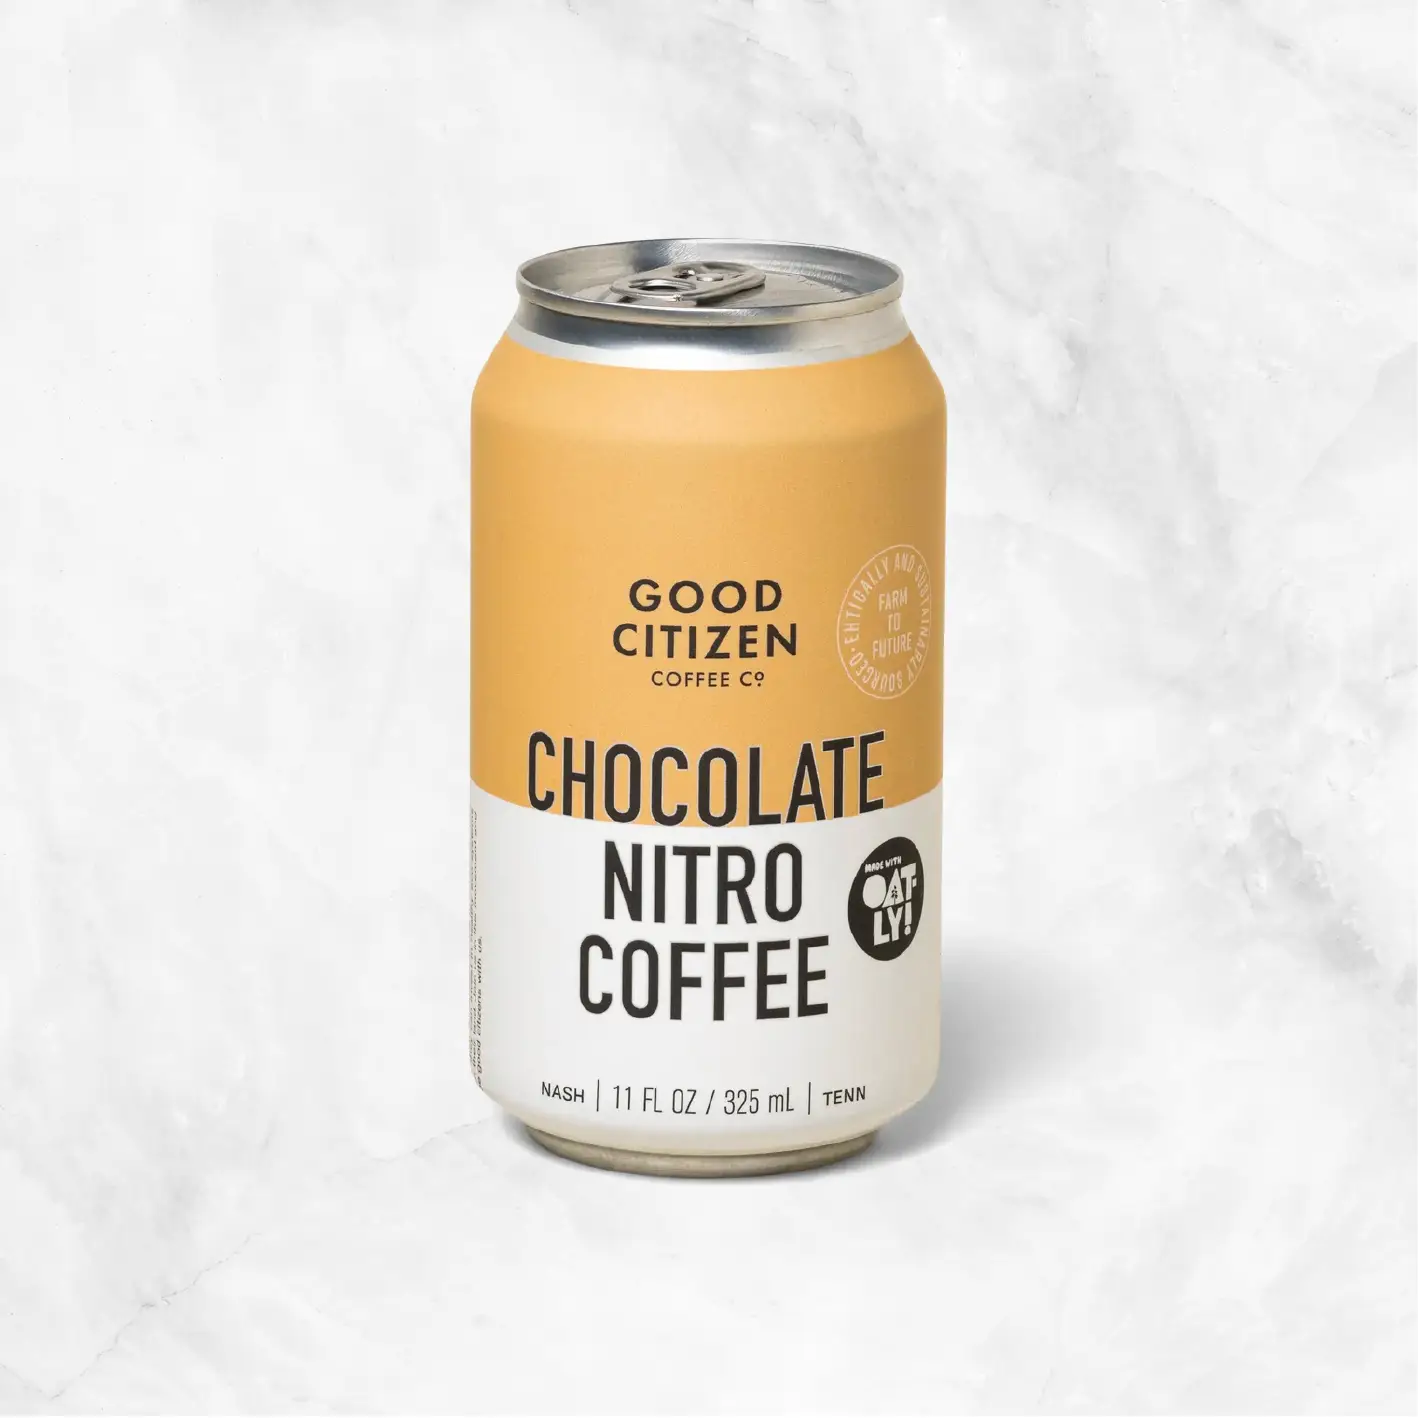 Chocolate Nitro Coffee Cans Delivery